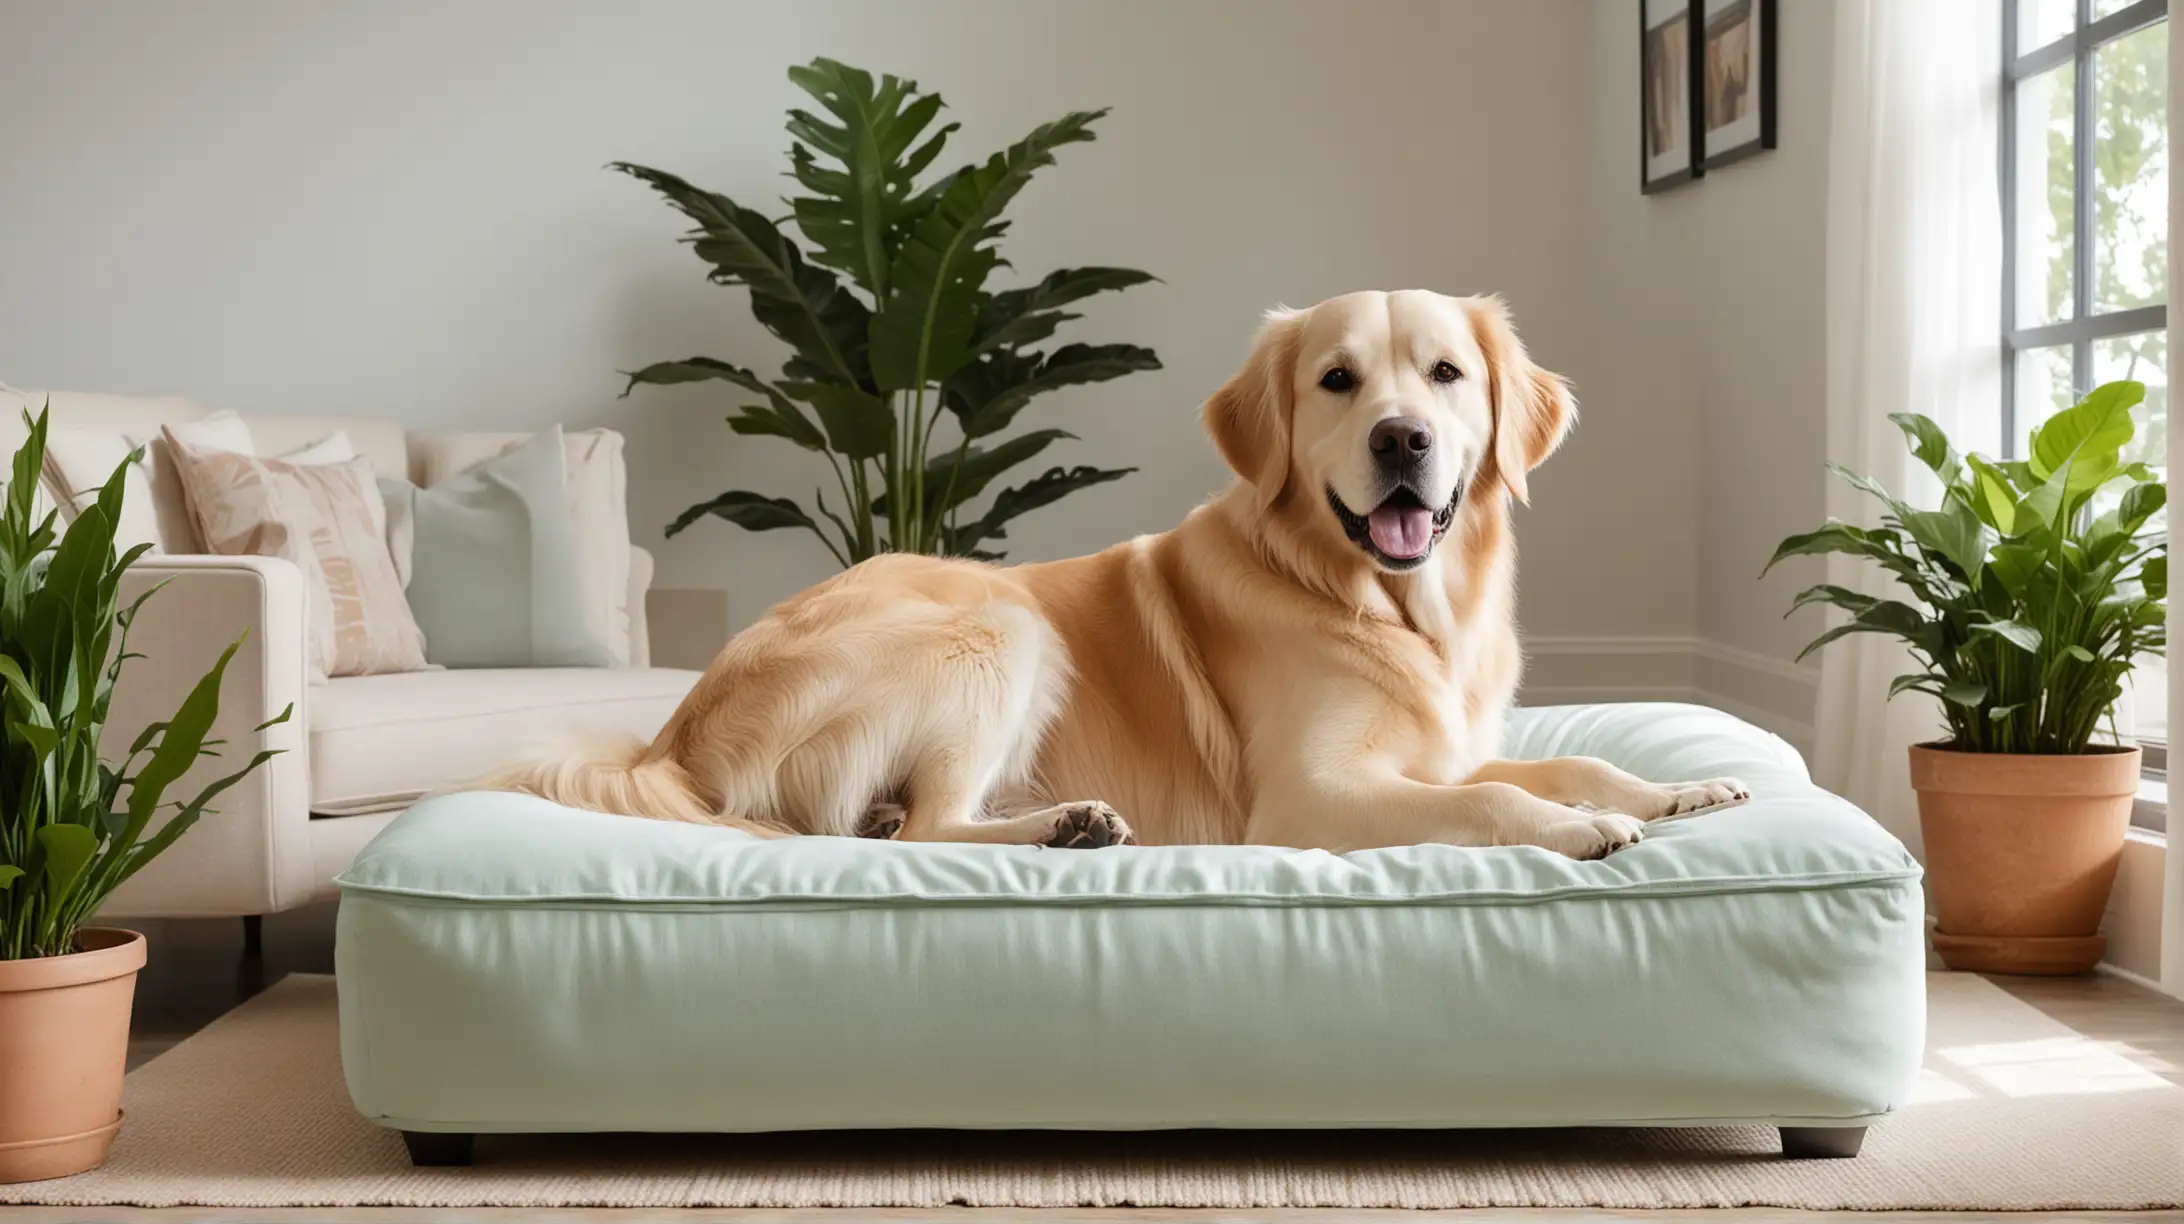 Luxurious PetFriendly Living Room with Relaxing Dog on Waterproof Mattress